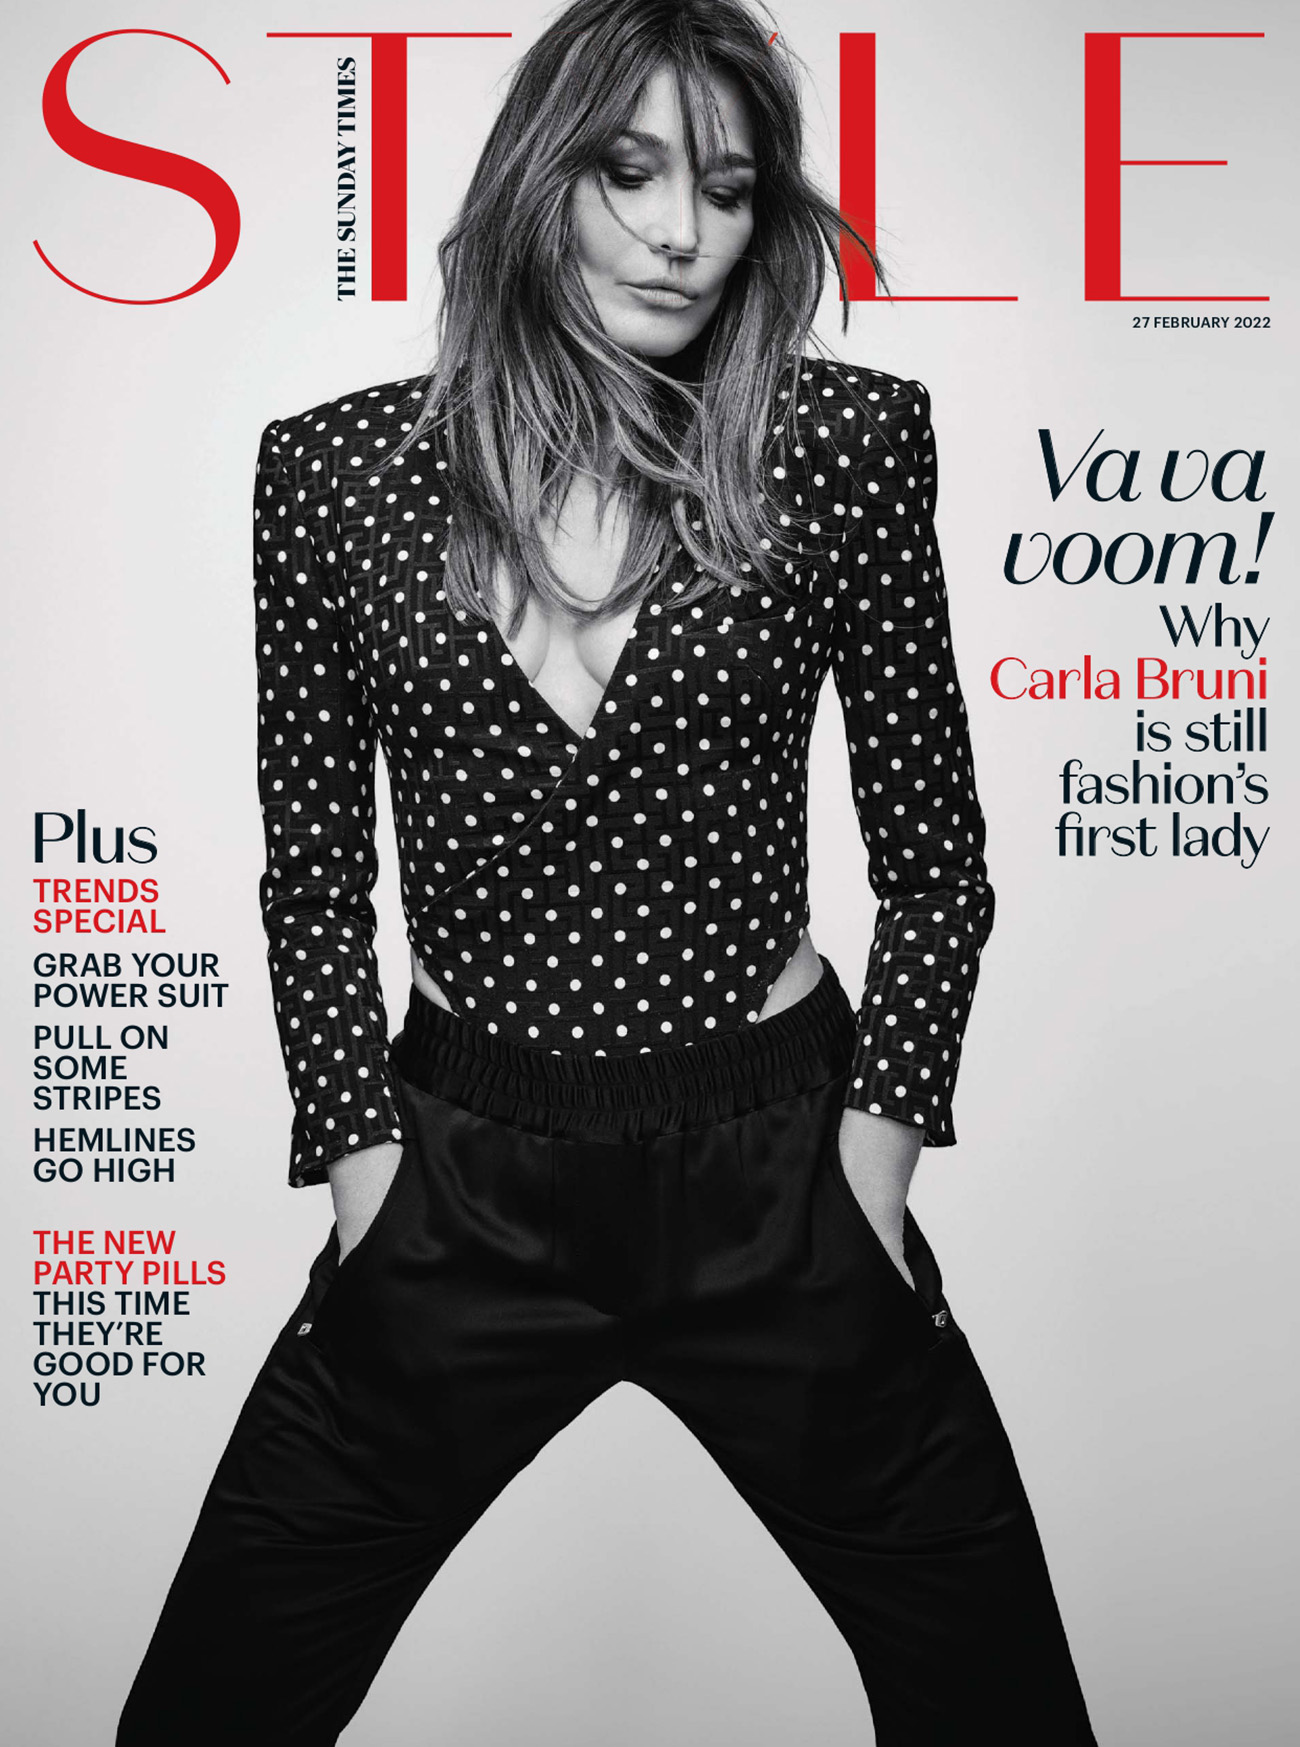 Carla Bruni in Balmain on The Sunday Times Style February 27th, 2022 by Nathaniel Goldberg